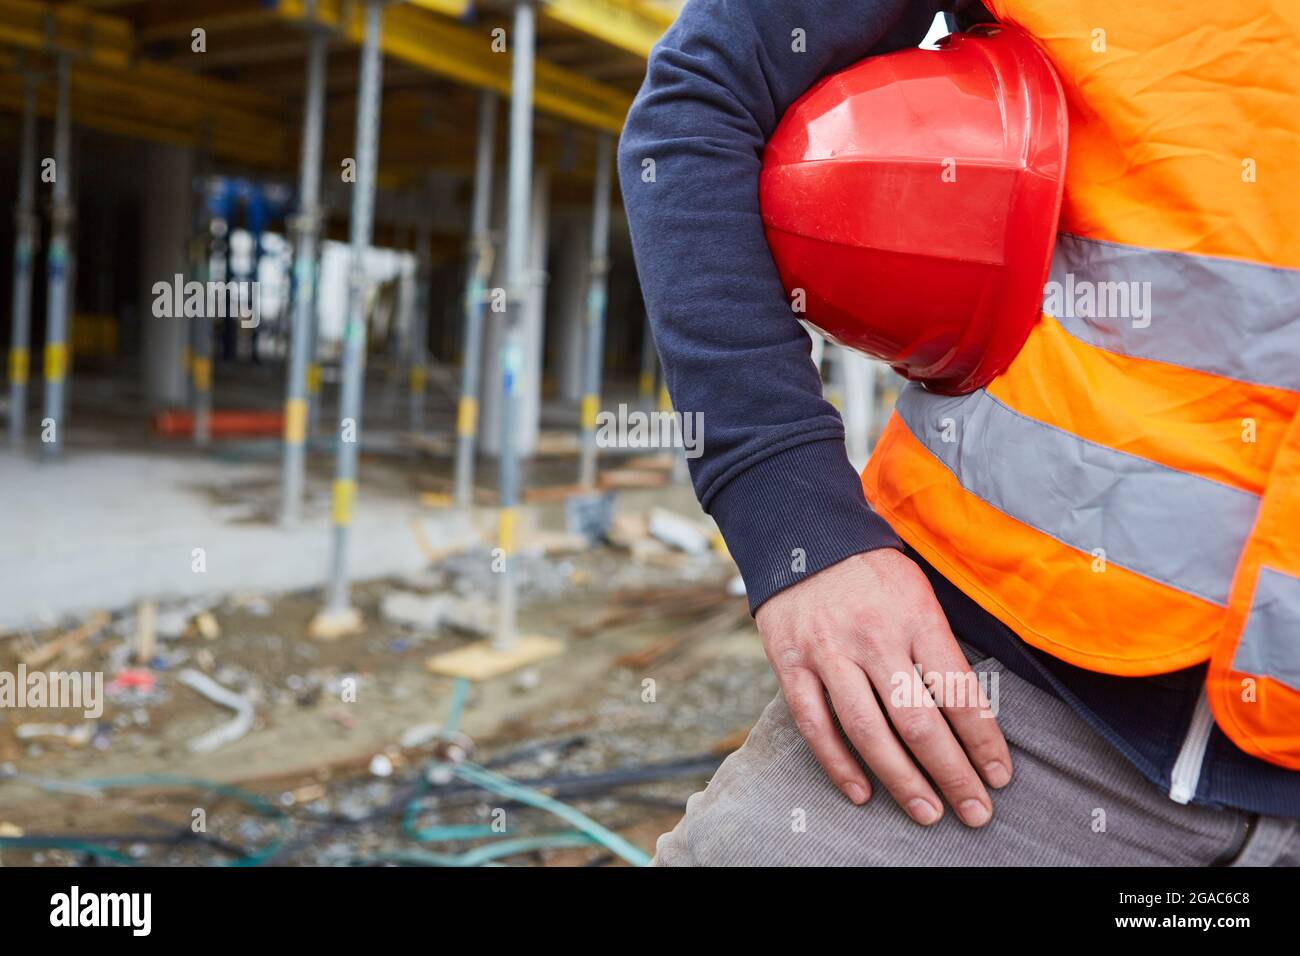 Construction worker with red hard hat and safety vest in orange on a building site under construction Stock Photo